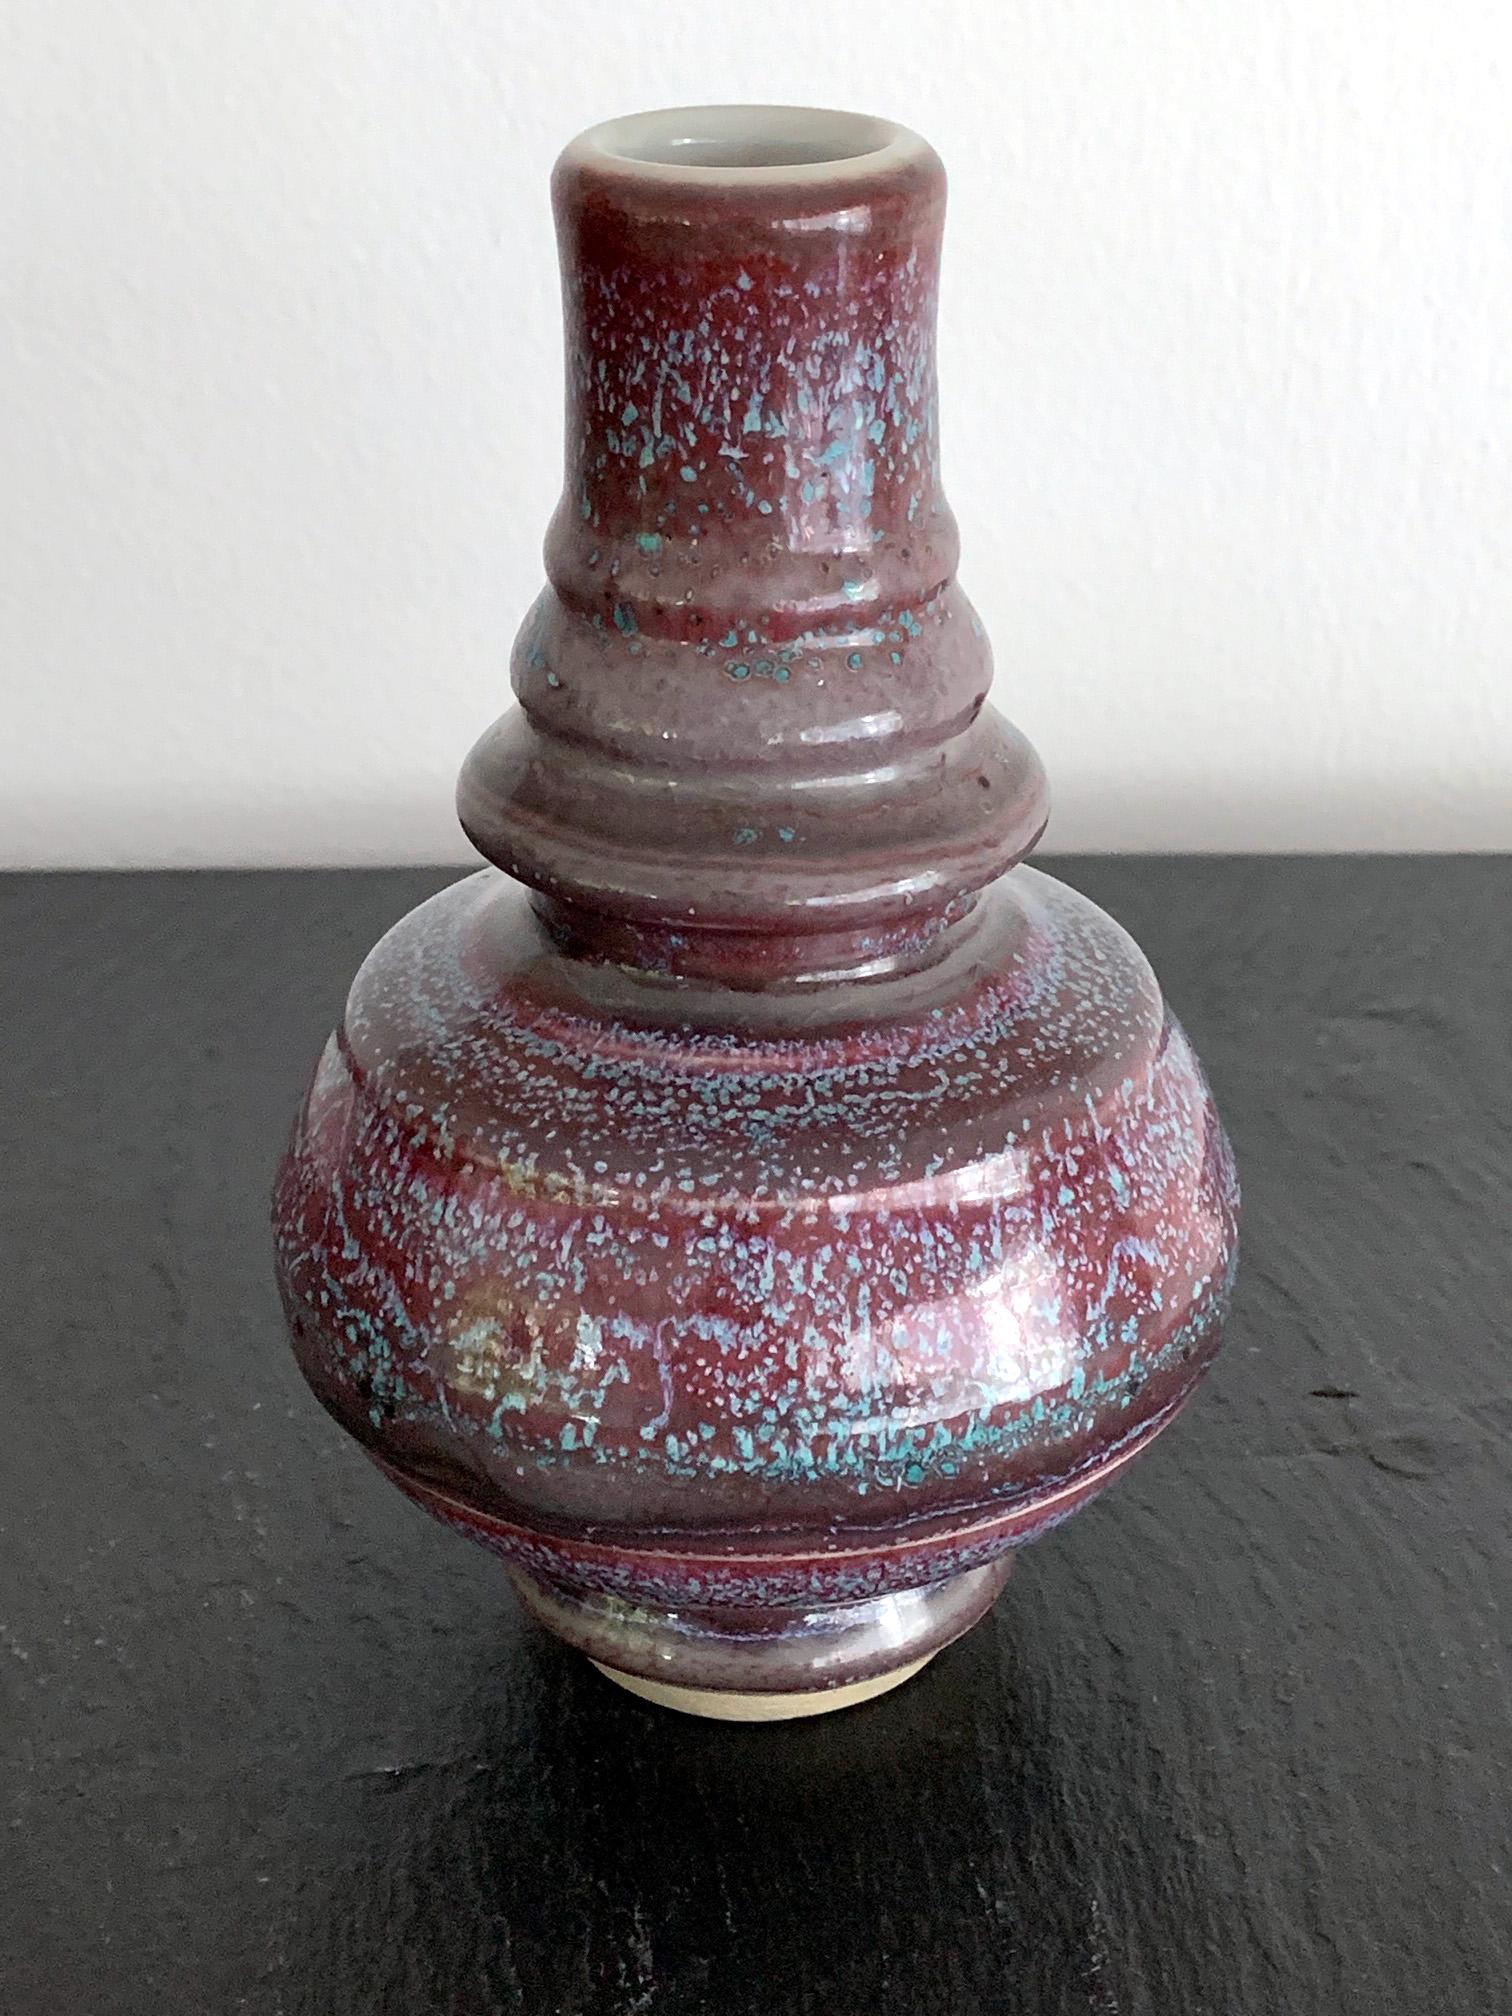 A garlic bottle vase in an archaic Chinese form, but likely Japanese in origin. Several circumventing grooves however, suggest a more modern age. It was done in a brilliant purple glaze over a robin egg blue background glaze. The bubbling and